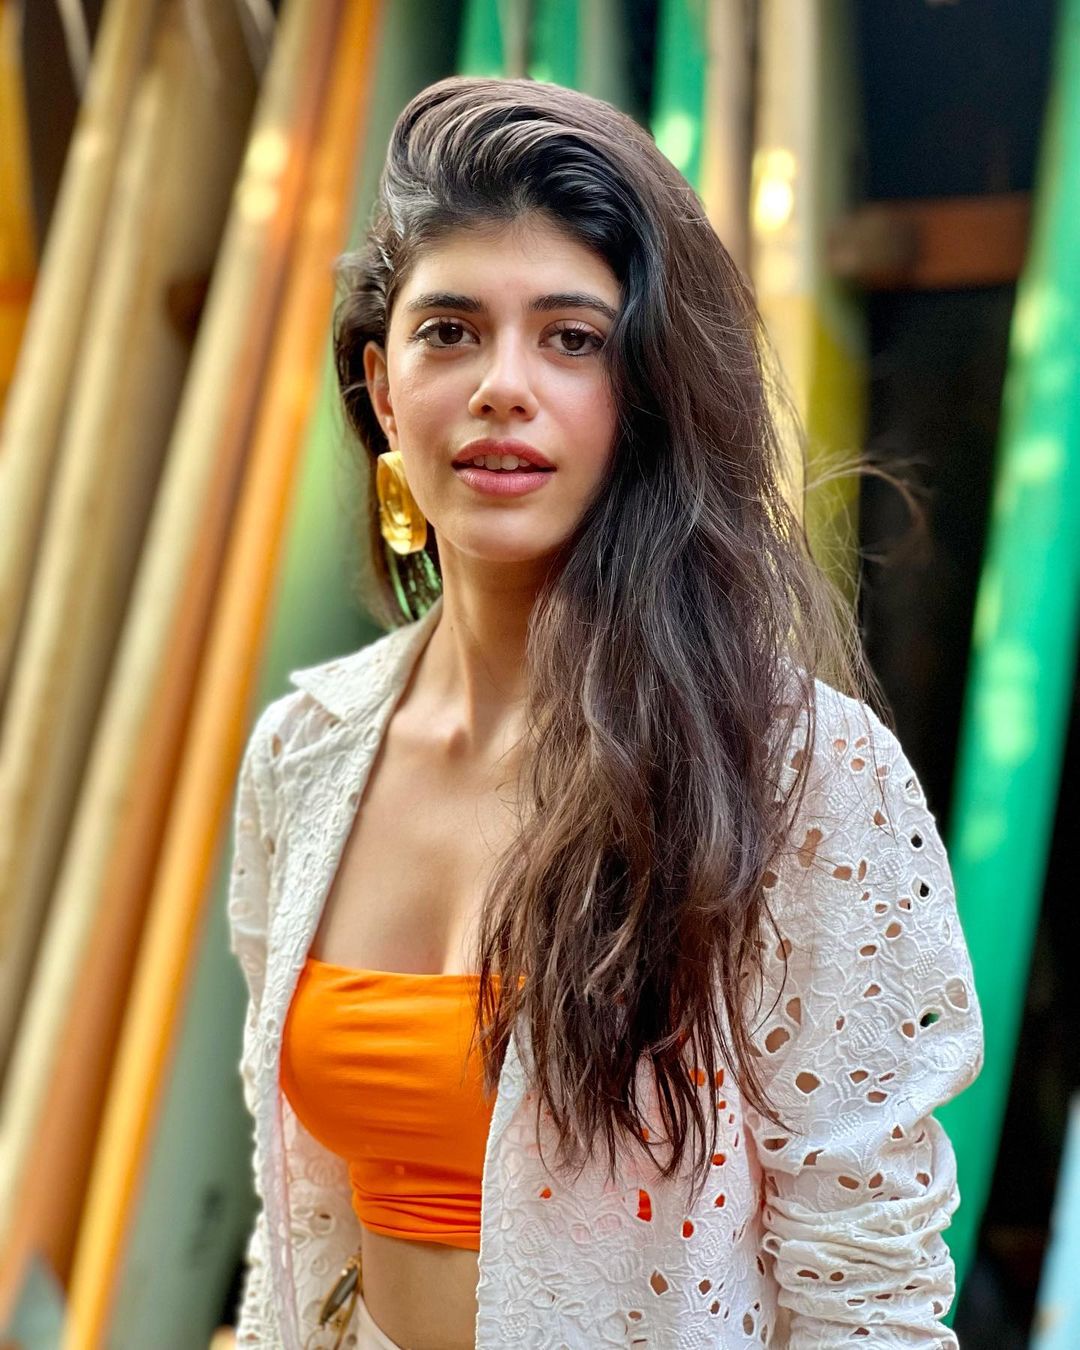 Sanjana Sanghi Looks Gorgeous In Orange Blouse And White Co-ords ...